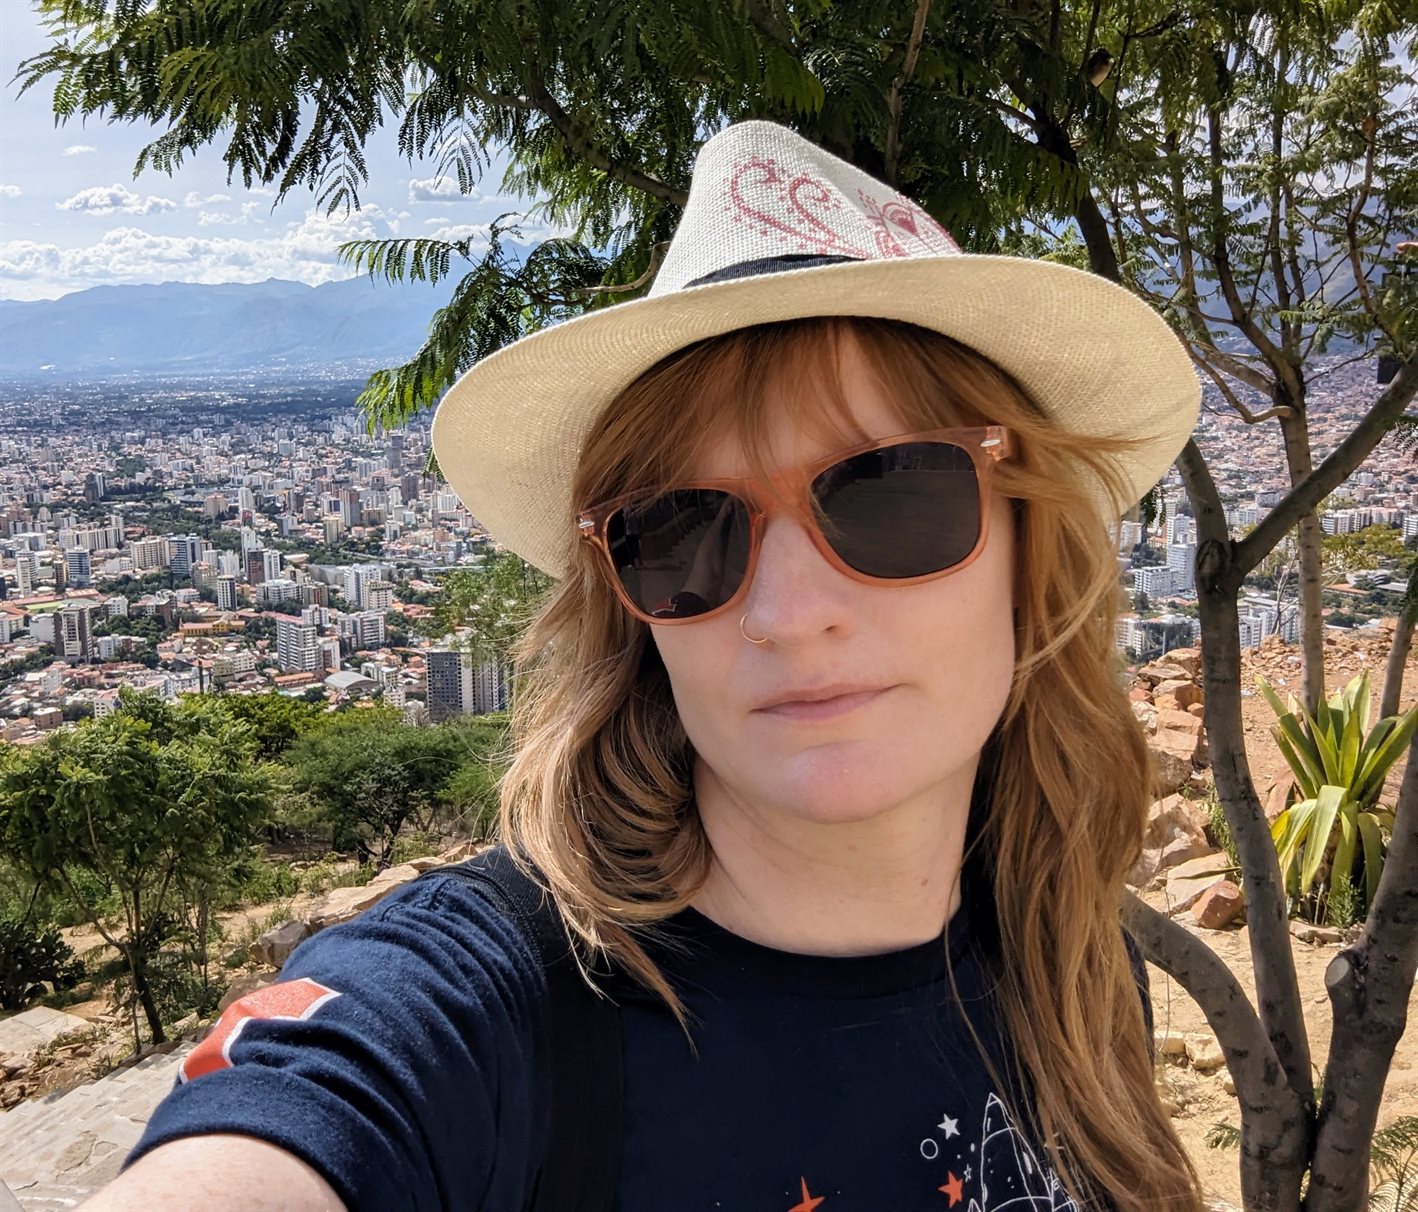 A selfie of pale white woman with red hair wearing a white hat, orange sunglasses, and a blue t-shirt in front of an overlook of a city.